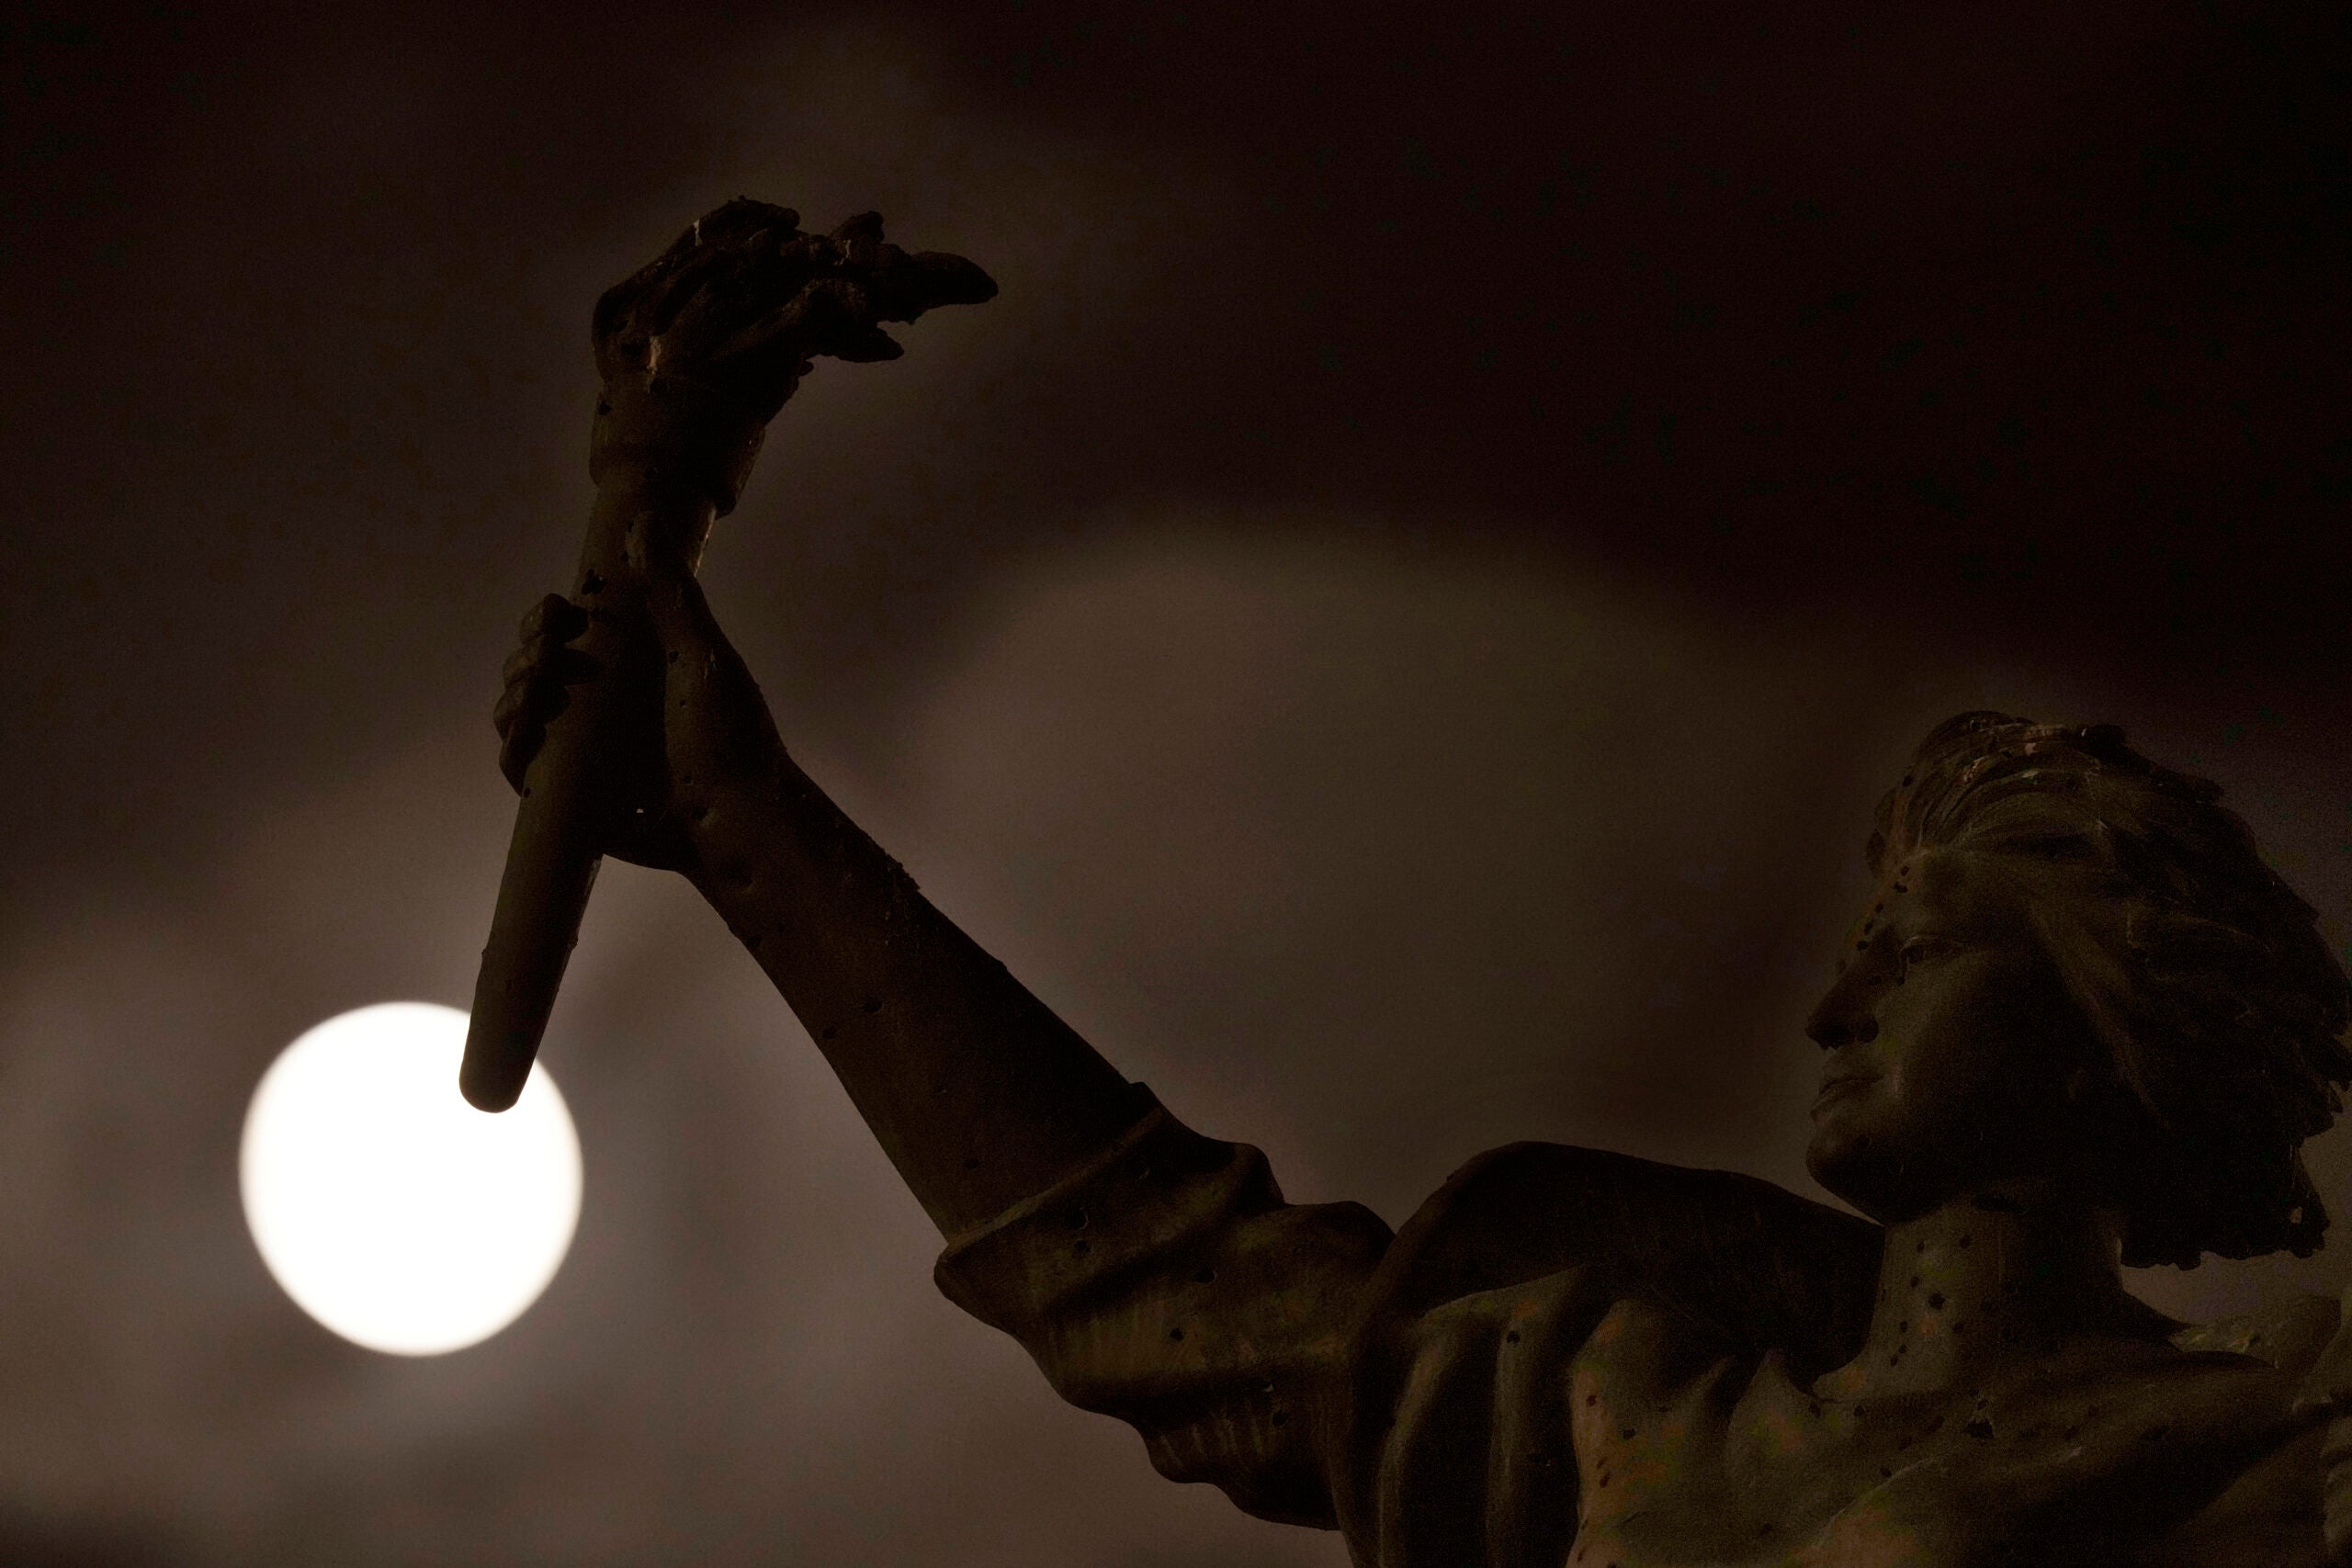 The full moon rises beyond the Martyrs statue, in downtown Beirut, Lebanon.